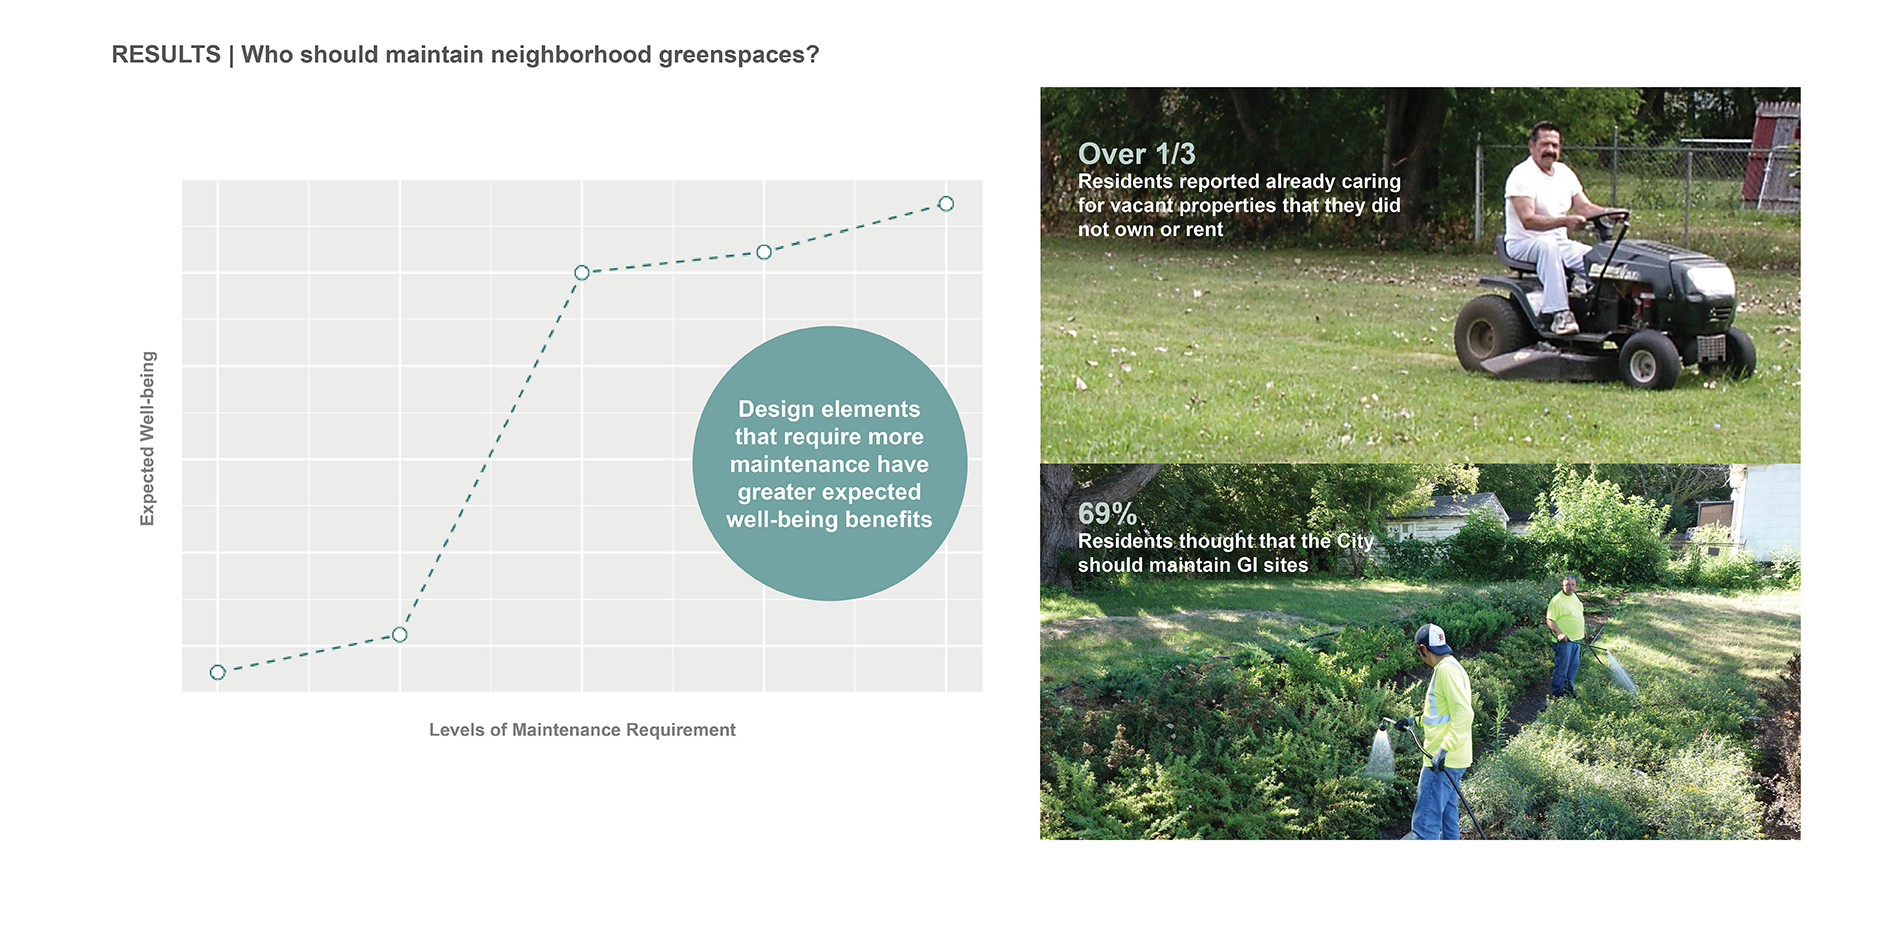 RESULTS: Who should maintain neighborhood greenspaces?